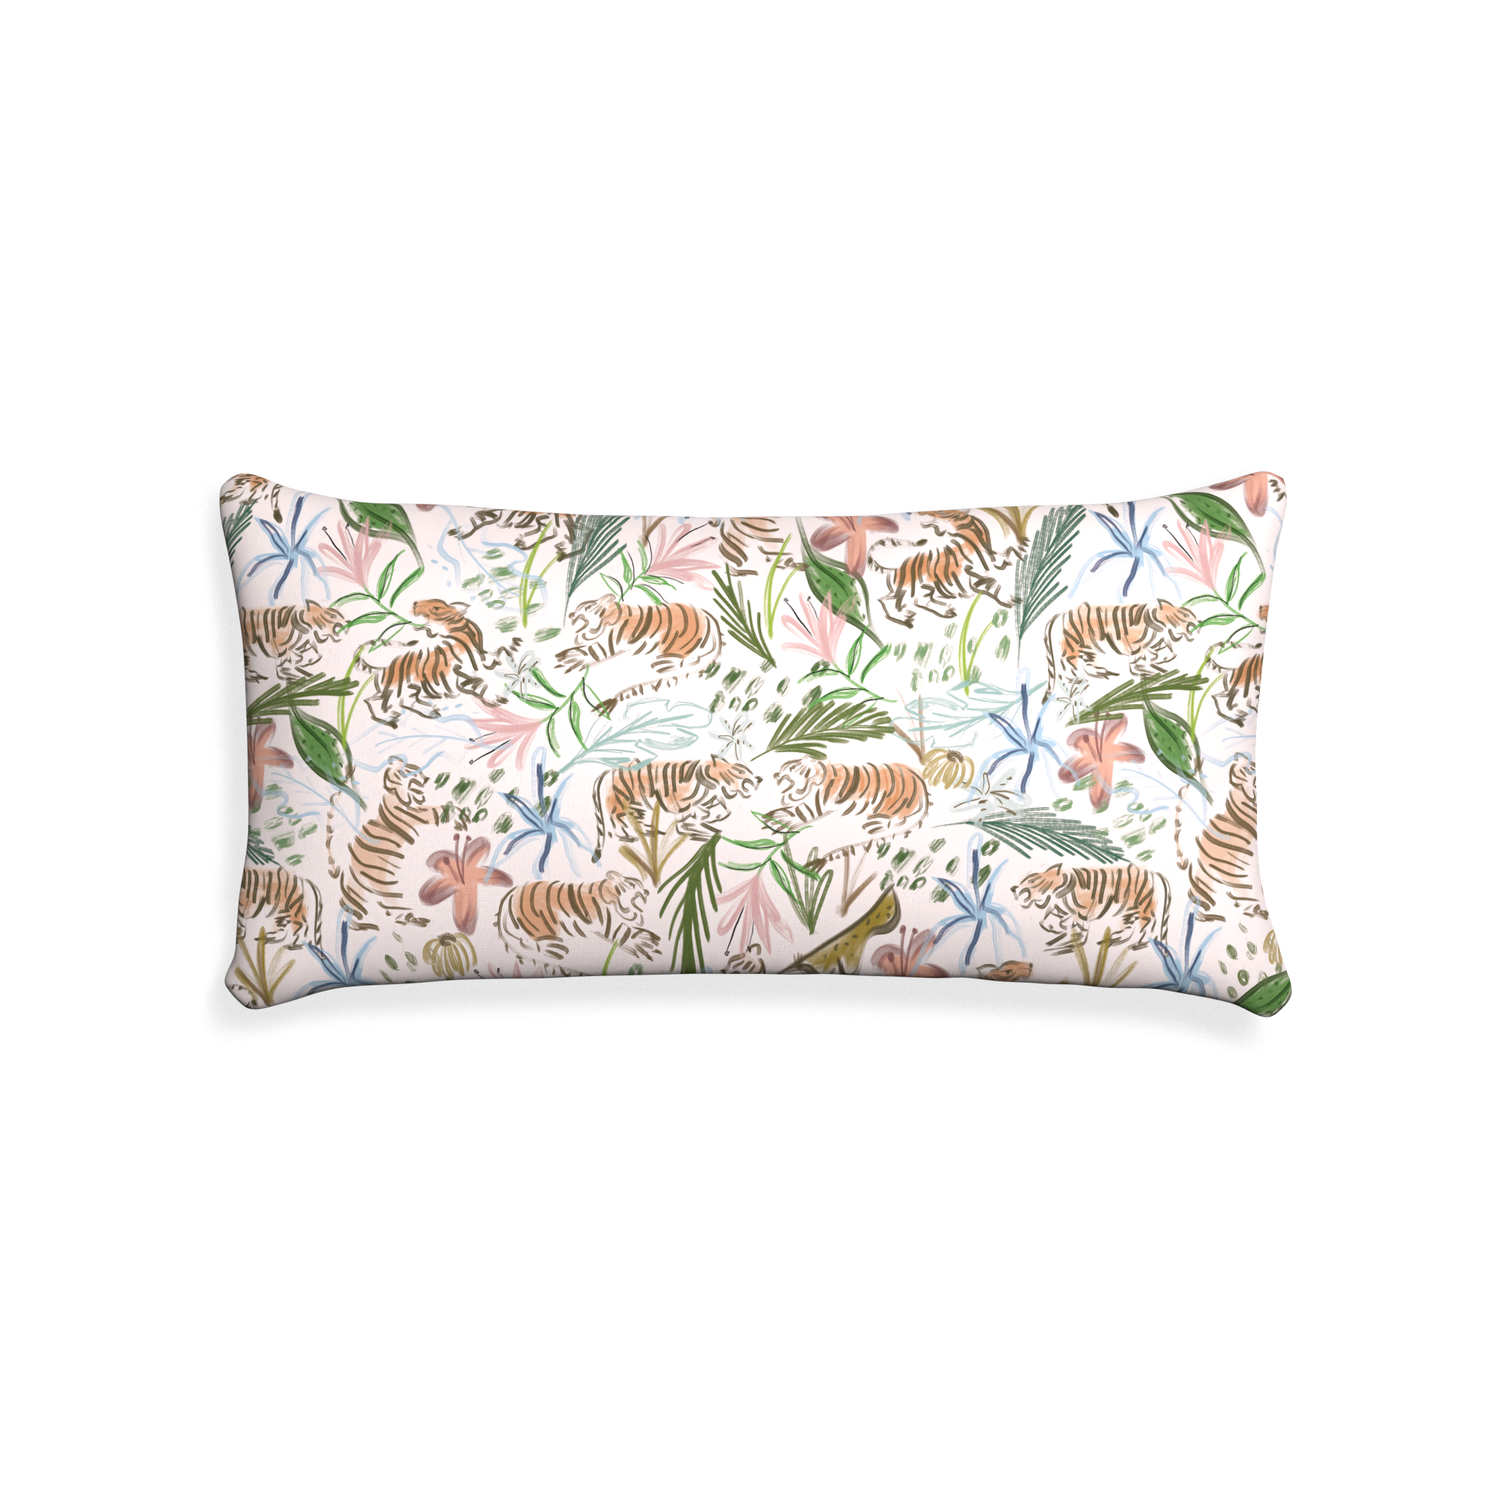 Midi-lumbar frida pink custom pink chinoiserie tigerpillow with none on white background